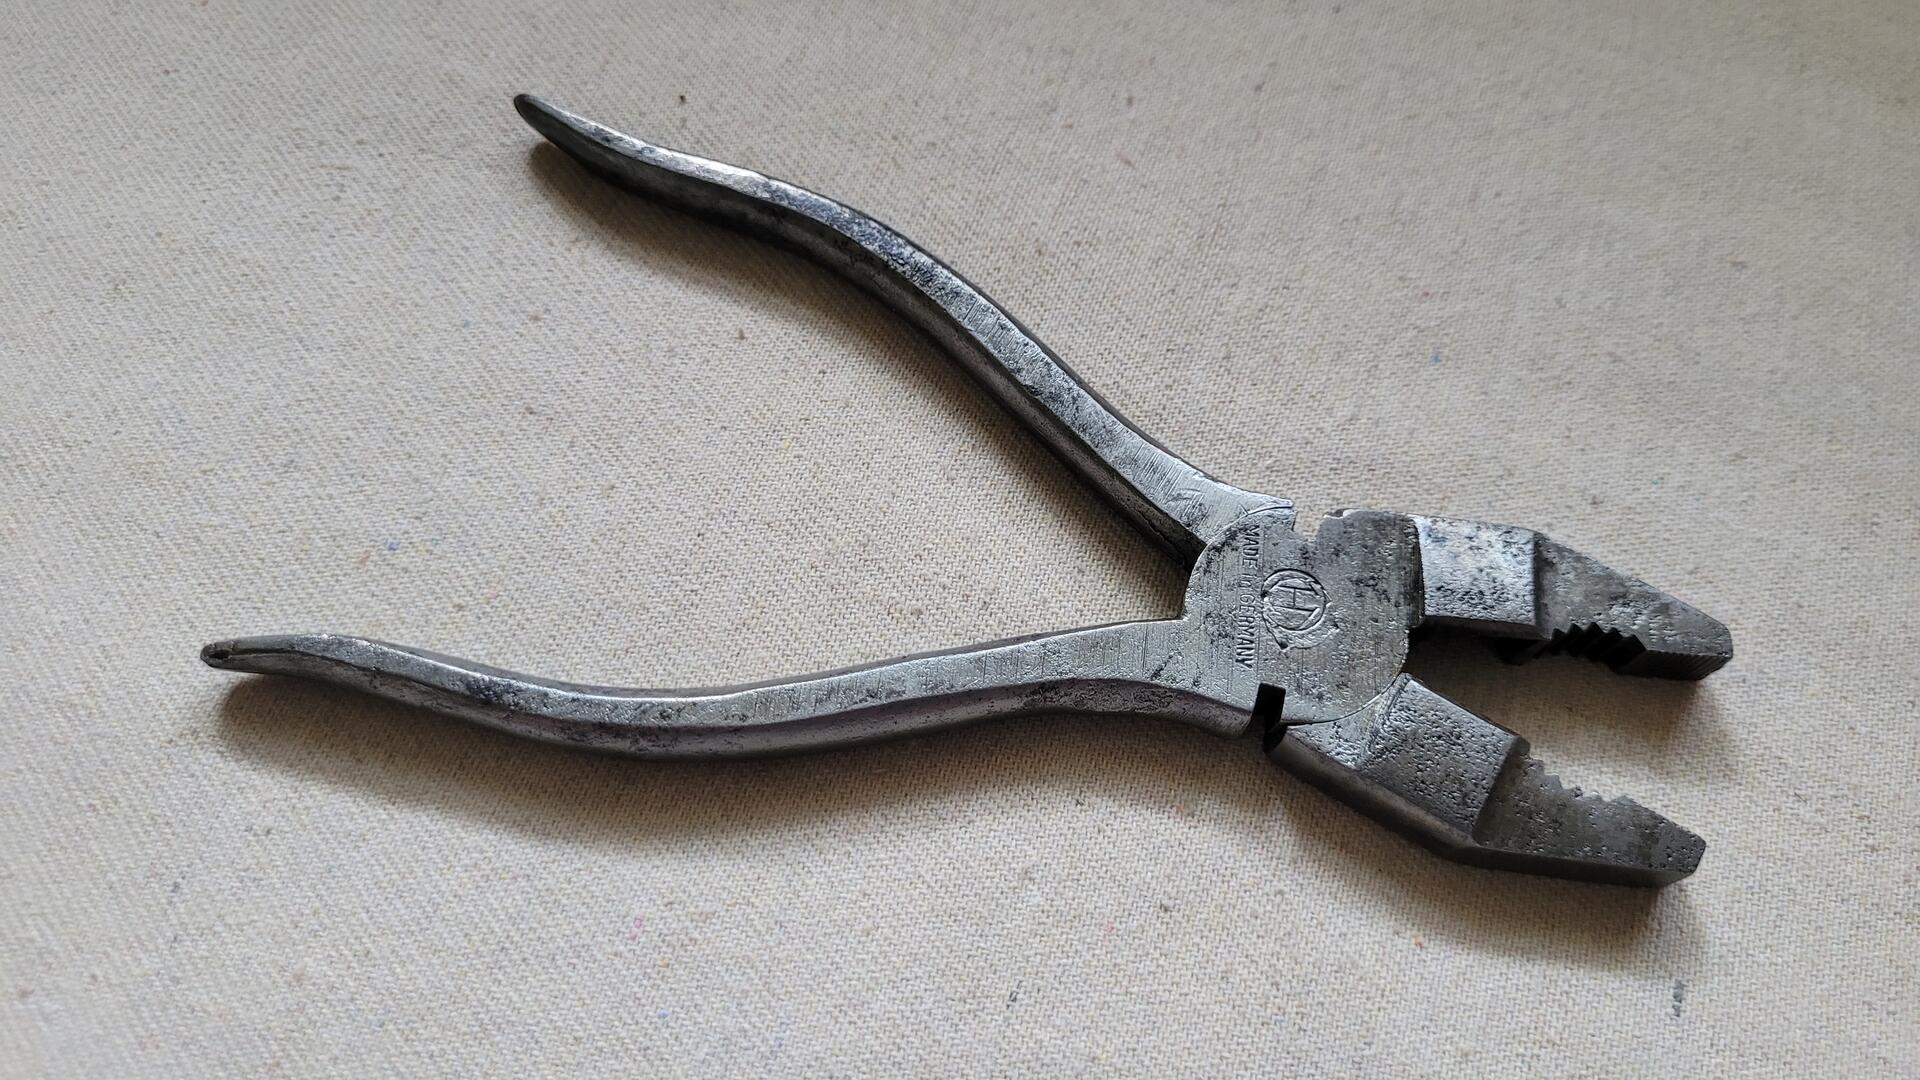 Antique Hoppe Tools Forged Lineman's Pliers Wire Cutters - Vintage made in Germany collectible electrician hand tools